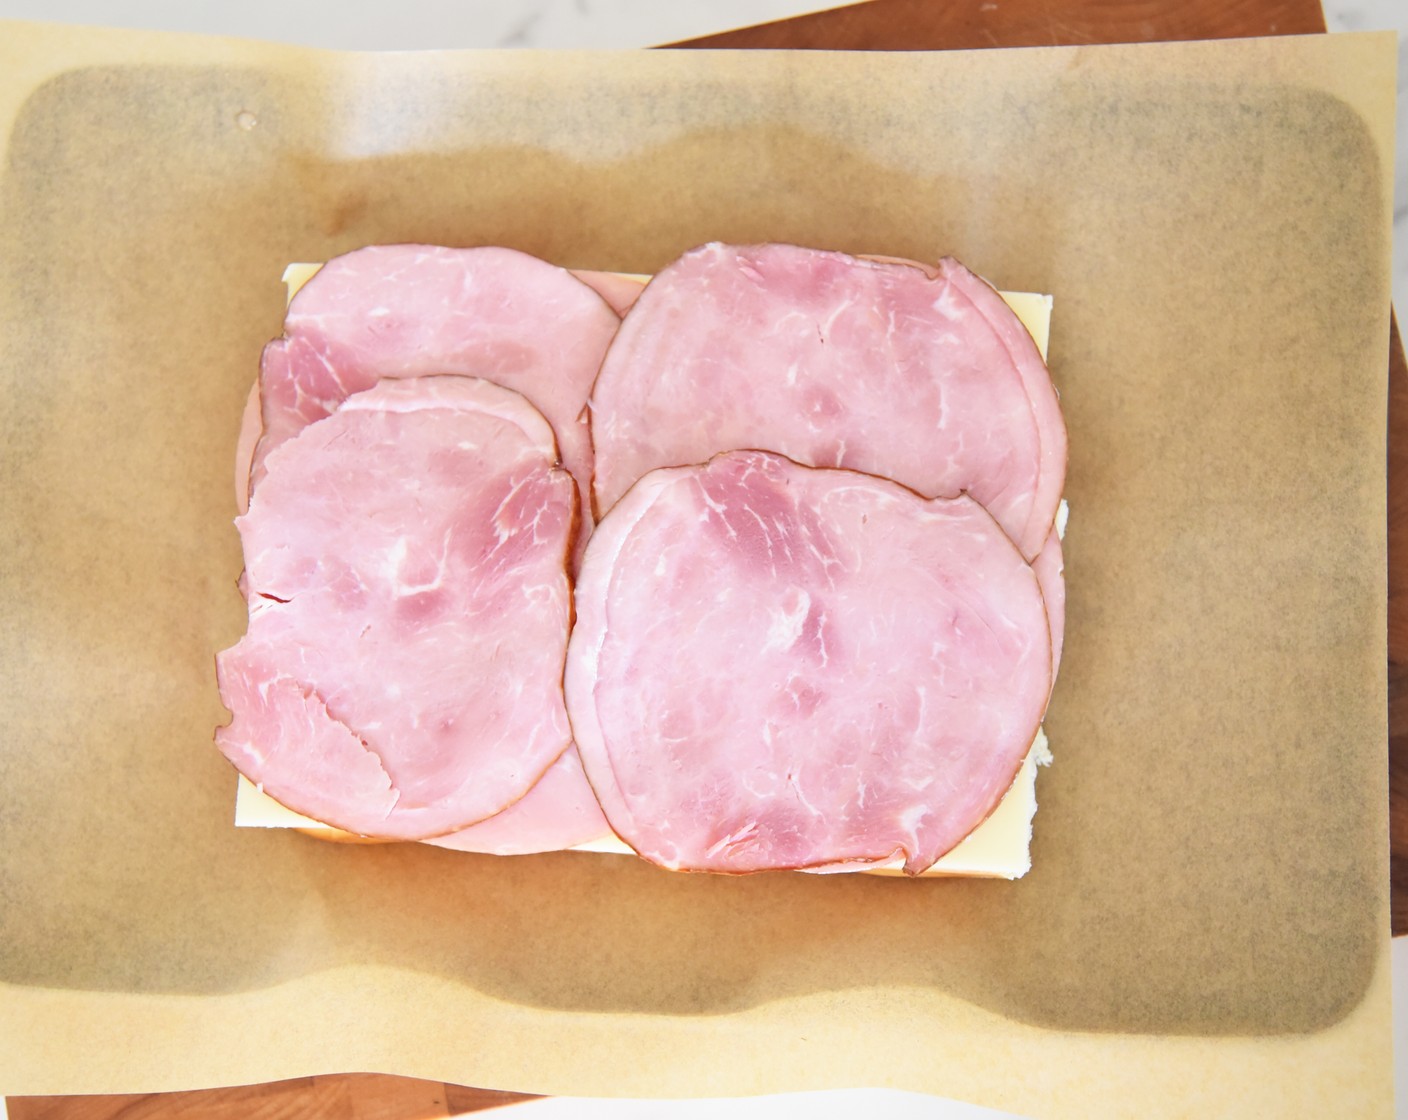 step 5 Lay the Deli Ham (8 oz) evenly on top of the Swiss cheese slices.